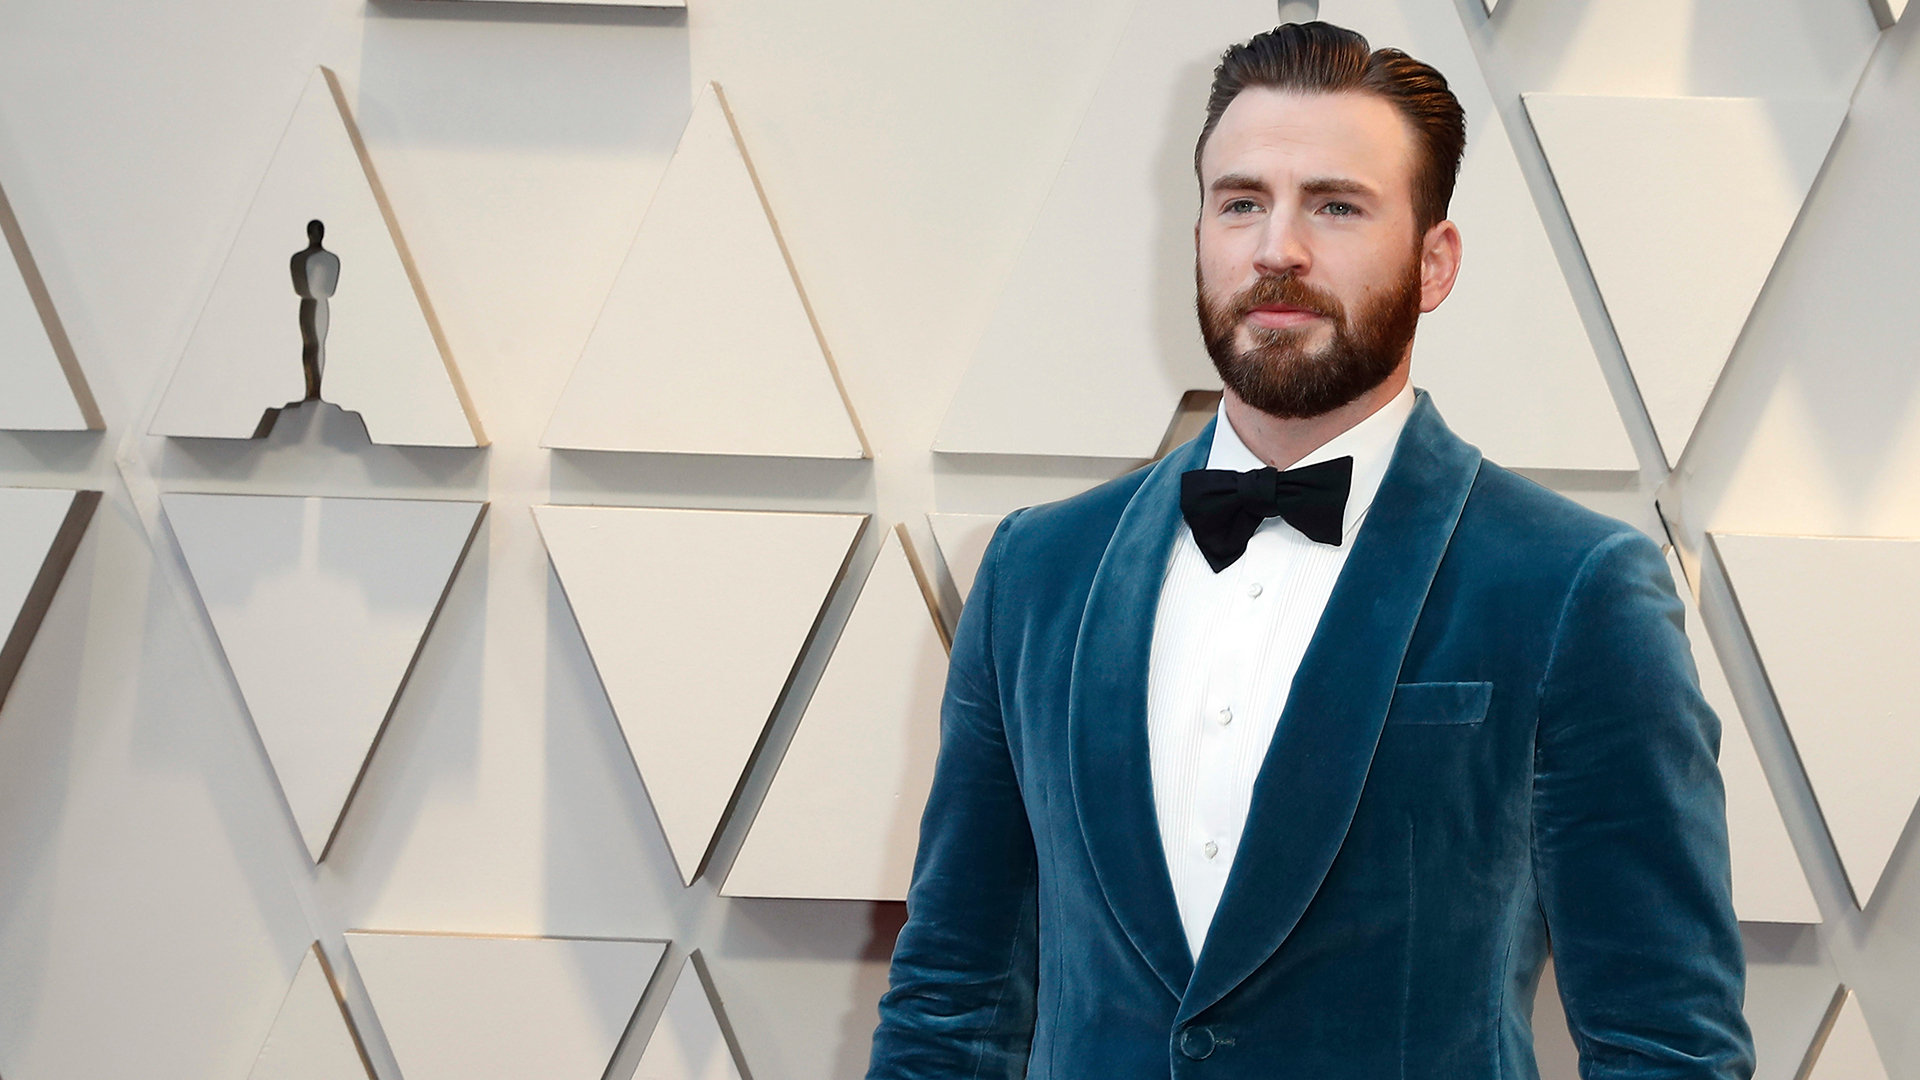 Video: Chris Evans Channeled Prince Charming for His Oscars 2019